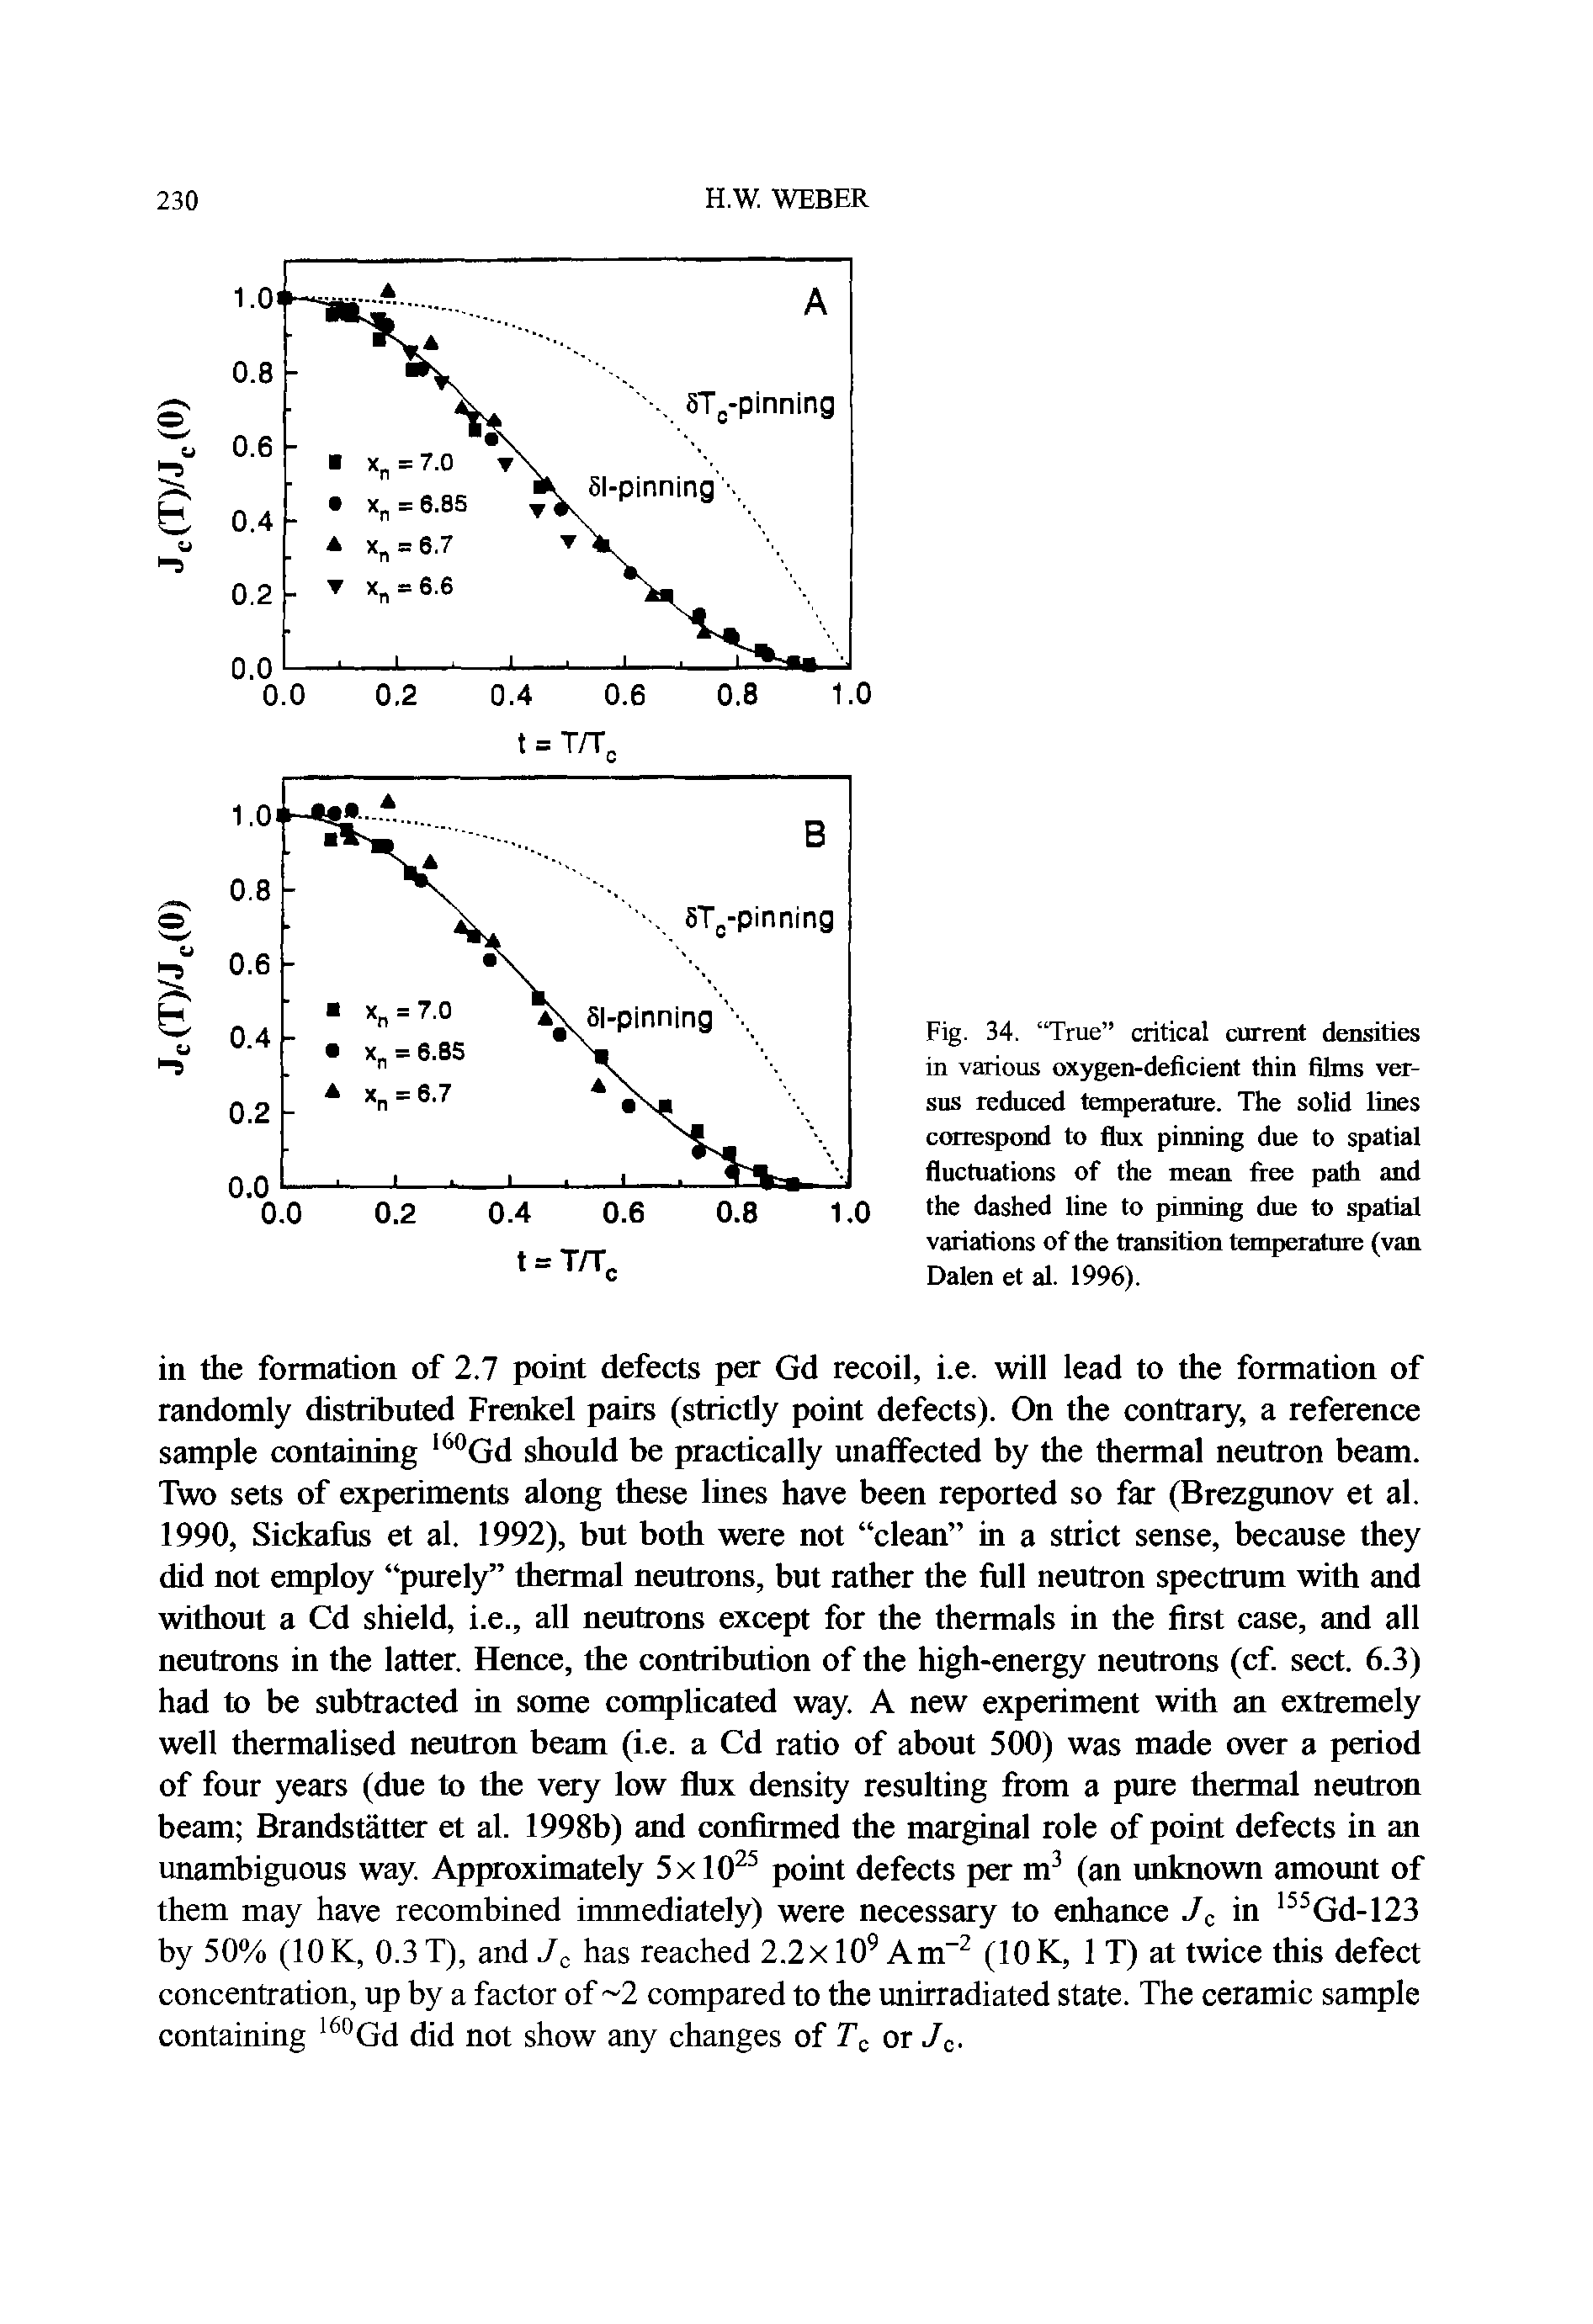 Fig. 34. True critical current densities in various oxygen-deficient thin films versus reduced temperature. The solid lines correspond to flux pinning due to spatial fluctuations of the mean fiee path and the dashed line to pitming due to spatial variations of the transition temperature (van Dalen et al. 1996).